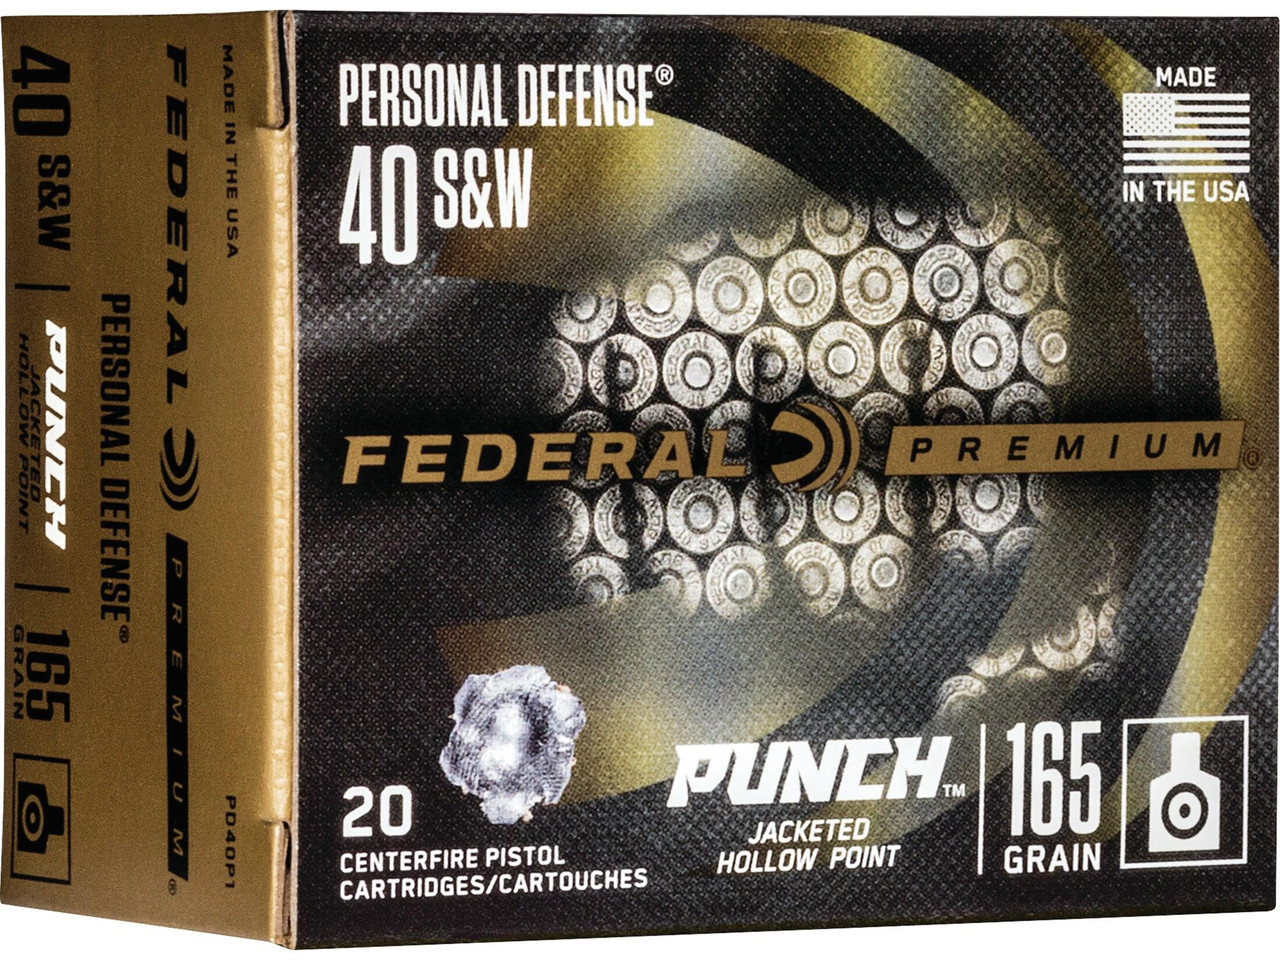 Federal Premium Personal Defense Punch Ammunition 40 S&W 165 Grain Jacketed Hollow Point Box of 20